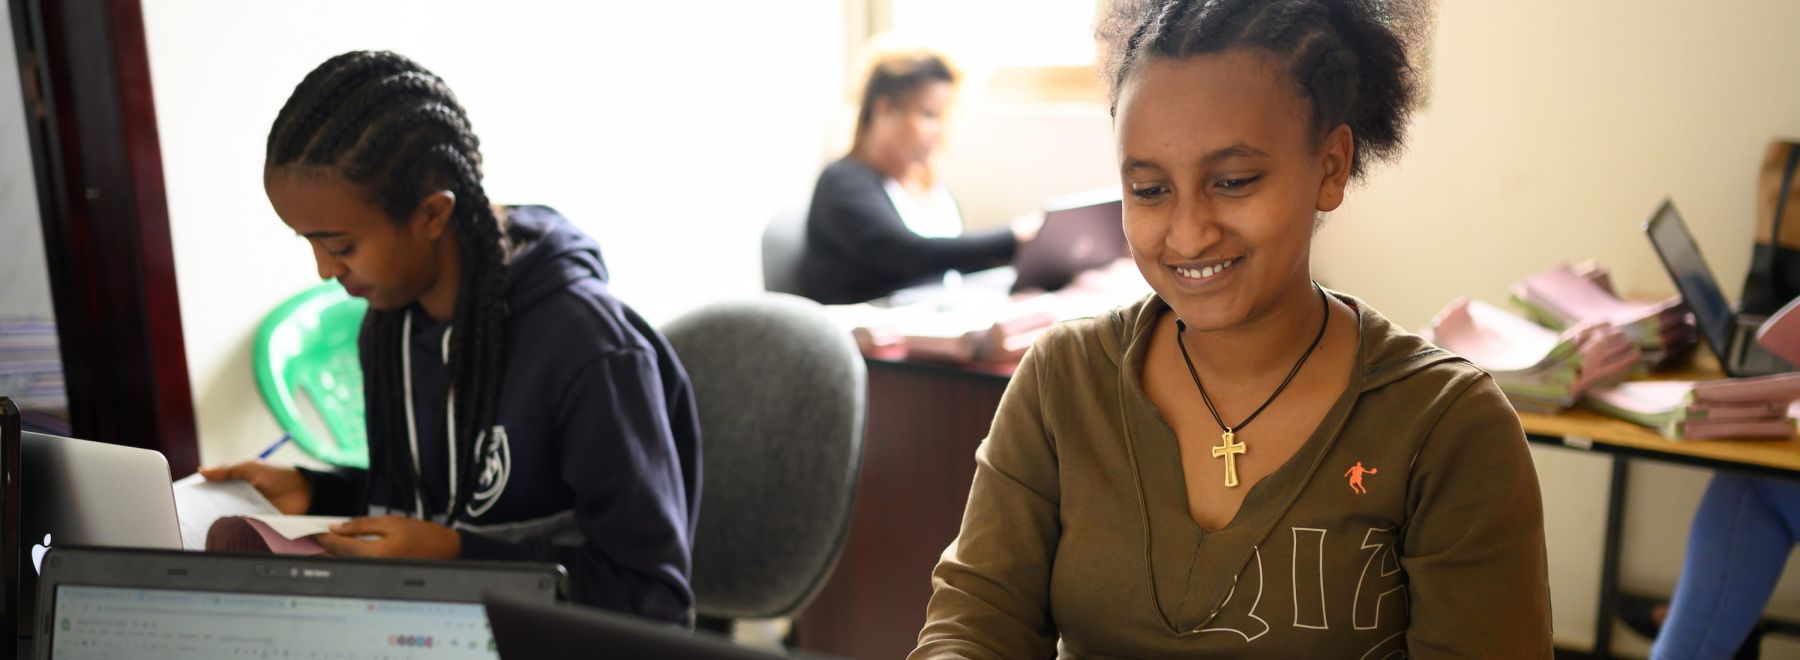 A One Acre Fund staff member in Bahir Dar, Ethiopia smiles as she works at her laptop